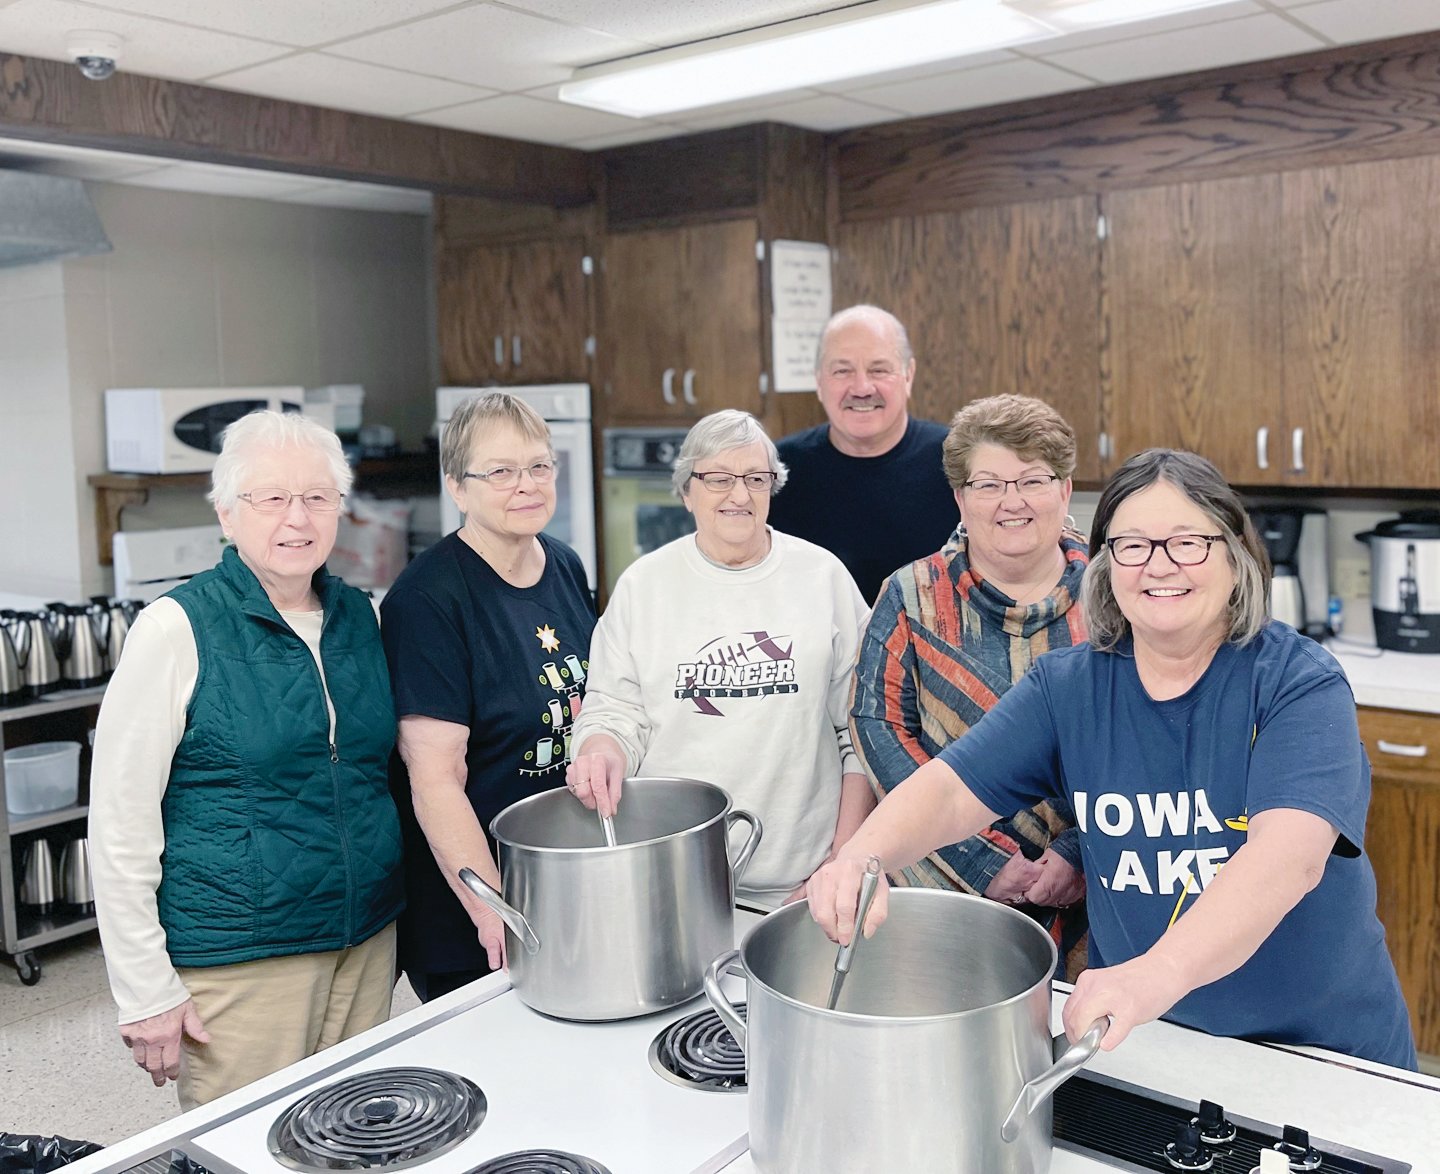 The founding crew of Wesley’s Kitchen is planning a lunch for Jan. 31. From left, Gladys Godfrey, Geri Boe, Donna Fredrickson, Pastor Kevin Moore, Nancy Rosberg and Sue Koons. Find a recipe from the group on Page 4A of today’s Estherville News.
Photo by Amy H. Peterson